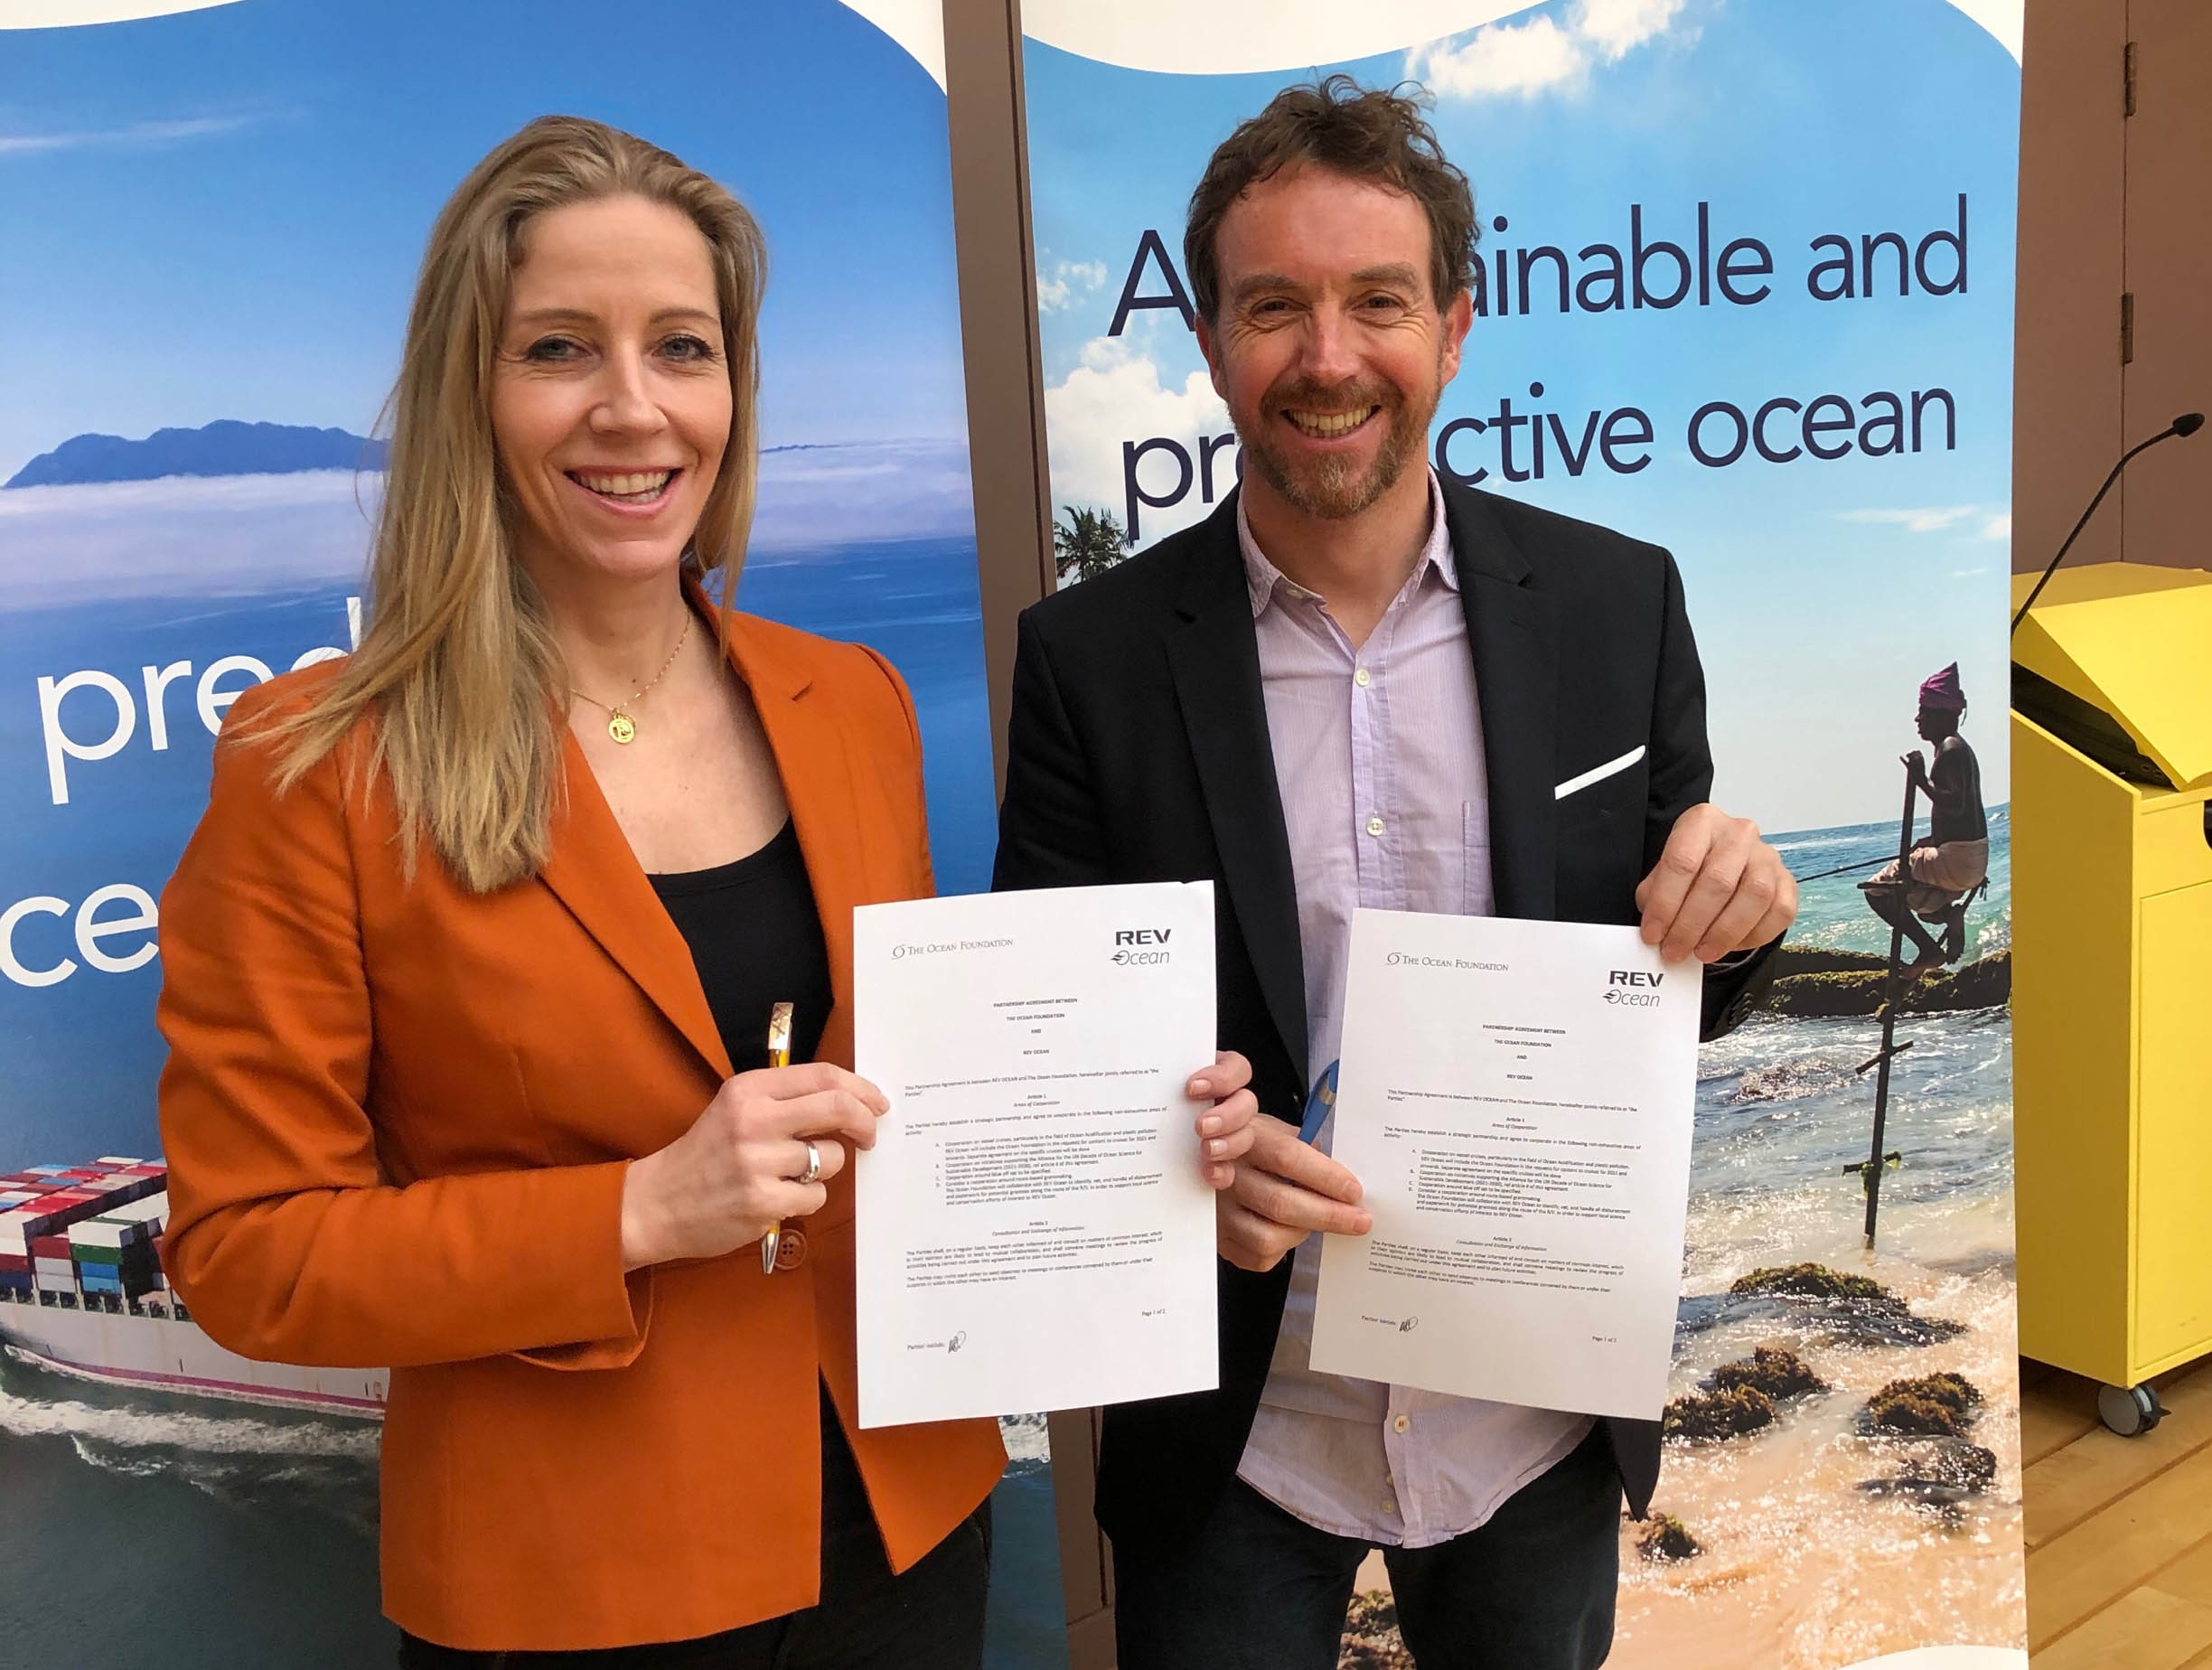 The Ocean Foundation and REV Ocean partner to scale ocean solutions